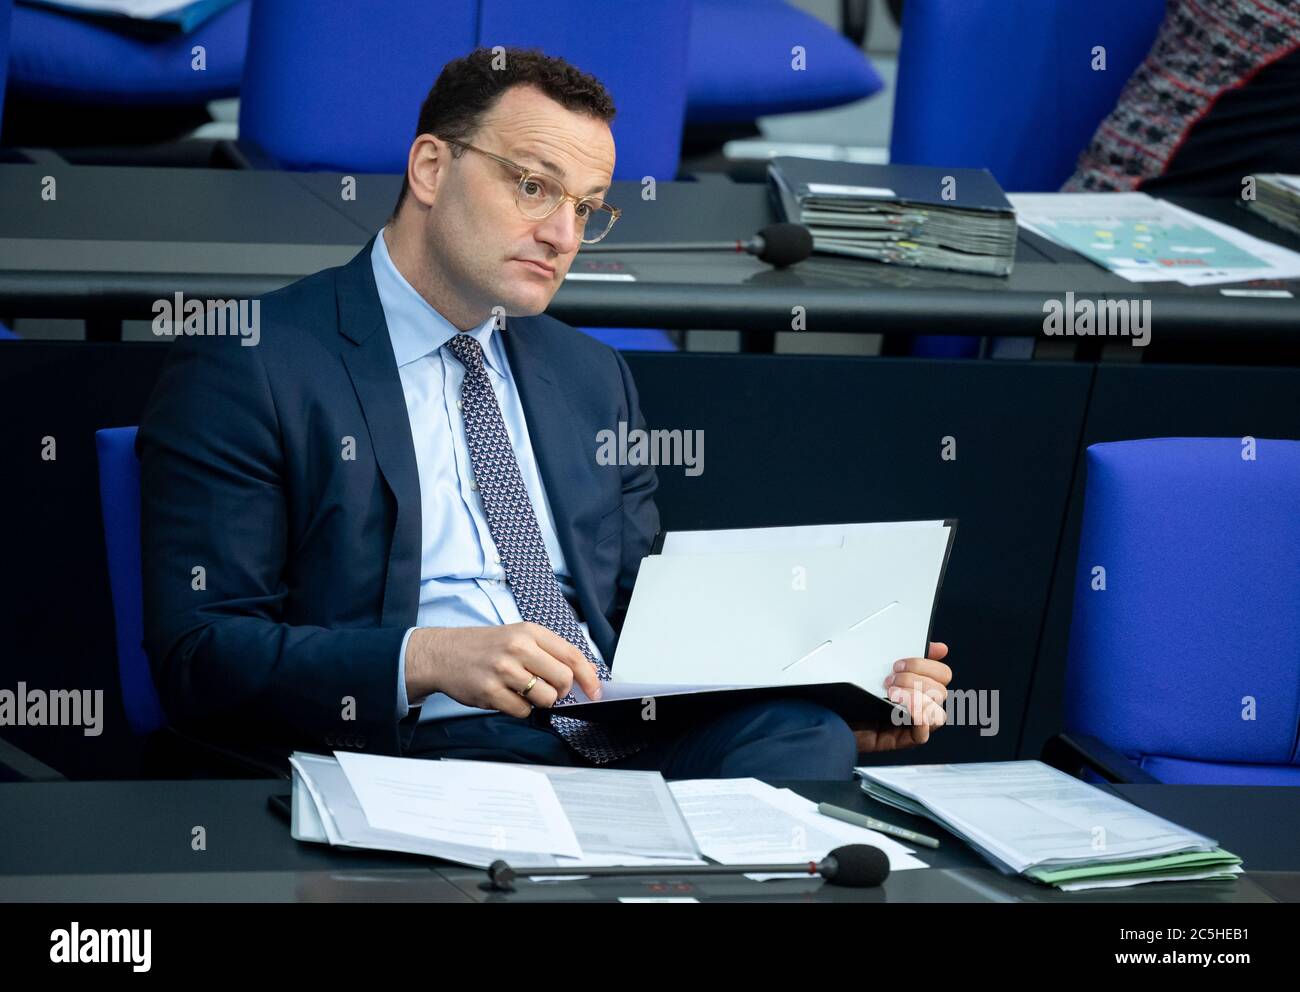 Berlin, Germany. 03rd July, 2020. Jens Spahn (CDU), Federal Minister of Health, sits in the plenary session of the German Bundestag. The main topics of the 171st session of the 19th legislative period are the adoption of the Coal Exit Act, a topical hour on the excesses of violence in Stuttgart, as well as debates on electoral law reform, the protection of electronic patient data, the welfare of farm animals and the German chairmanship of the UN Security Council. Credit: Bernd von Jutrczenka/dpa/Alamy Live News Stock Photo